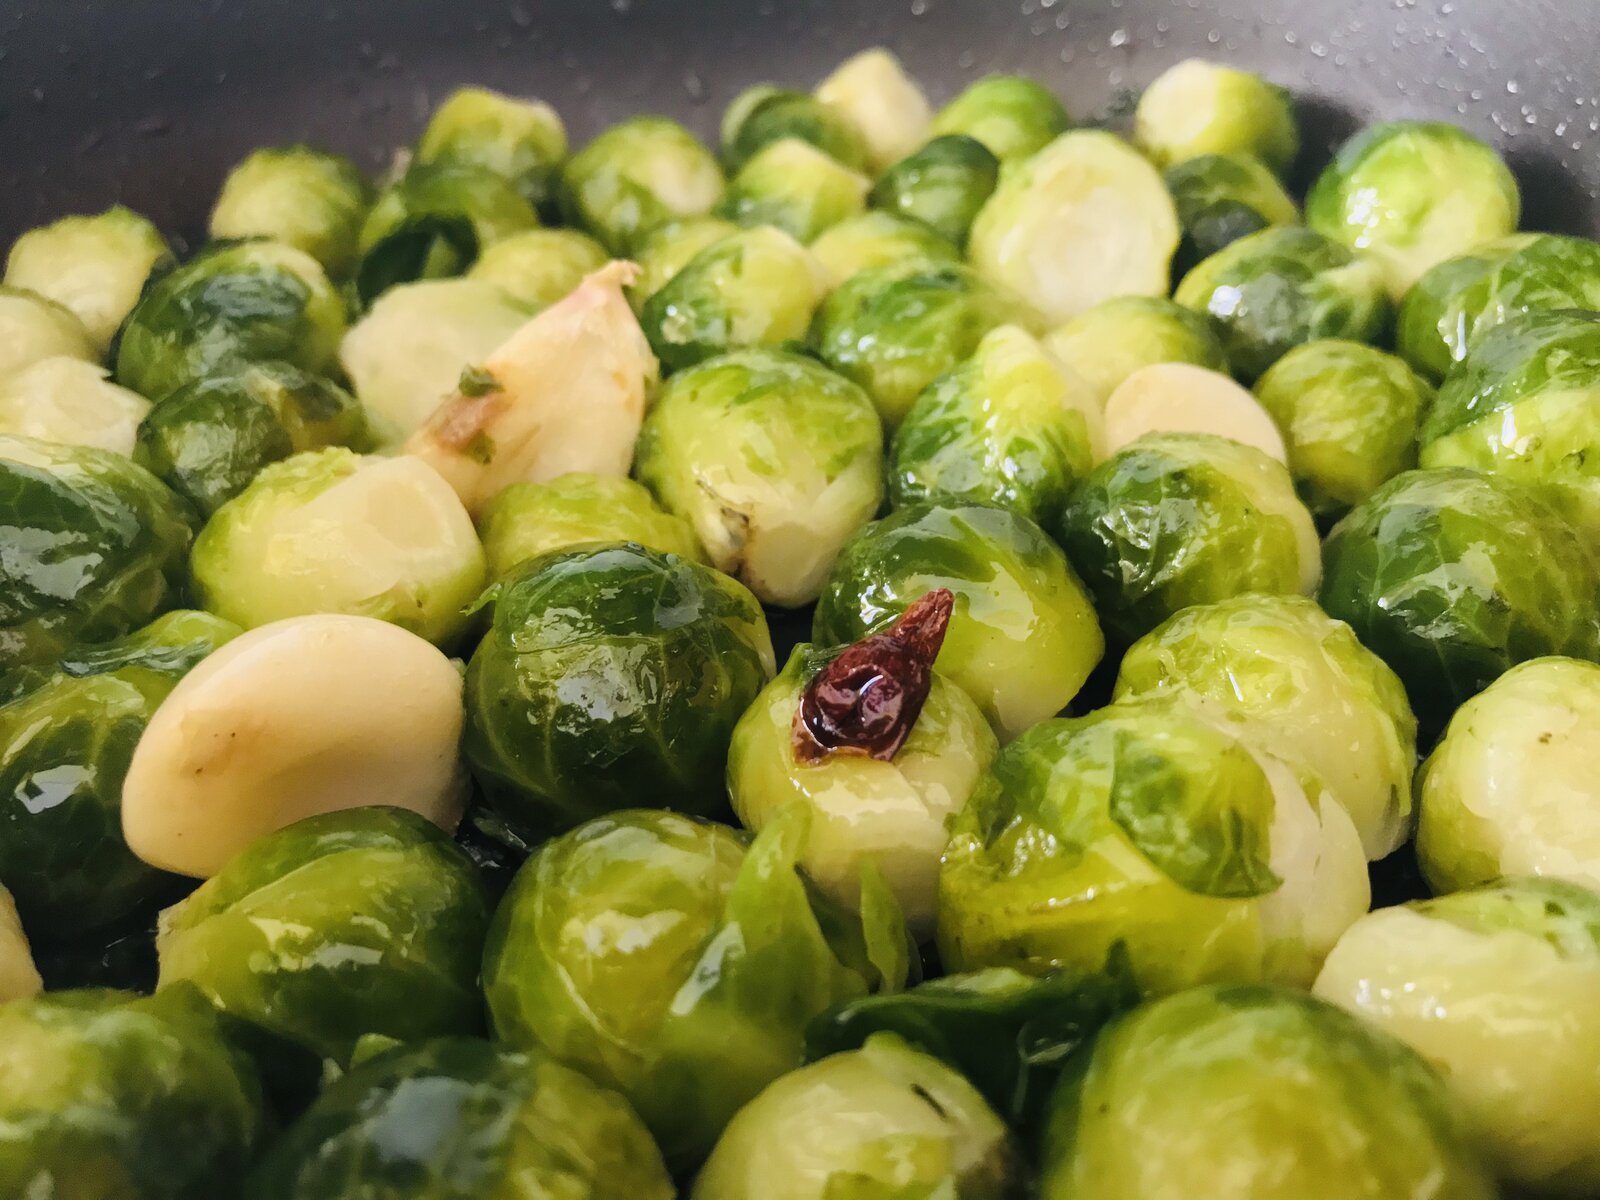 Brussels Sprout with garlic and chili pepper .jpeg